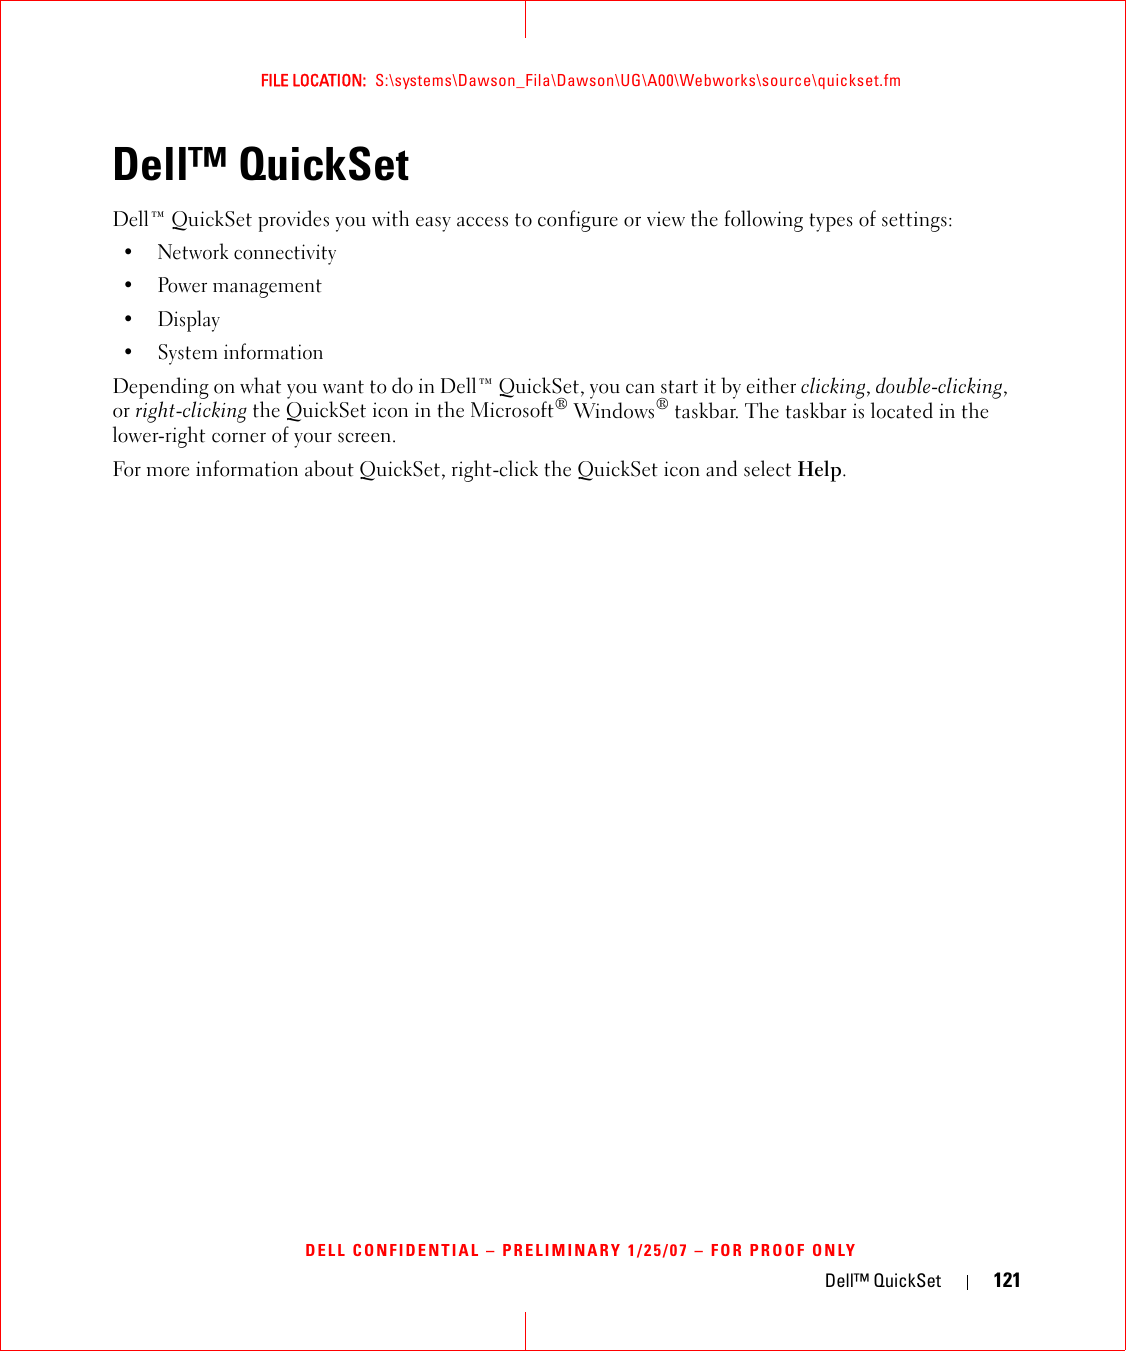 Dell™ QuickSet 121FILE LOCATION:  S:\systems\Dawson_Fila\Dawson\UG\A00\Webworks\source\quickset.fmDELL CONFIDENTIAL – PRELIMINARY 1/25/07 – FOR PROOF ONLYDell™ QuickSet Dell™ QuickSet provides you with easy access to configure or view the following types of settings:• Network connectivity• Power management•Display• System informationDepending on what you want to do in Dell™ QuickSet, you can start it by either clicking, double-clicking, or right-clicking the QuickSet icon in the Microsoft® Windows® taskbar. The taskbar is located in the lower-right corner of your screen.For more information about QuickSet, right-click the QuickSet icon and select Help.